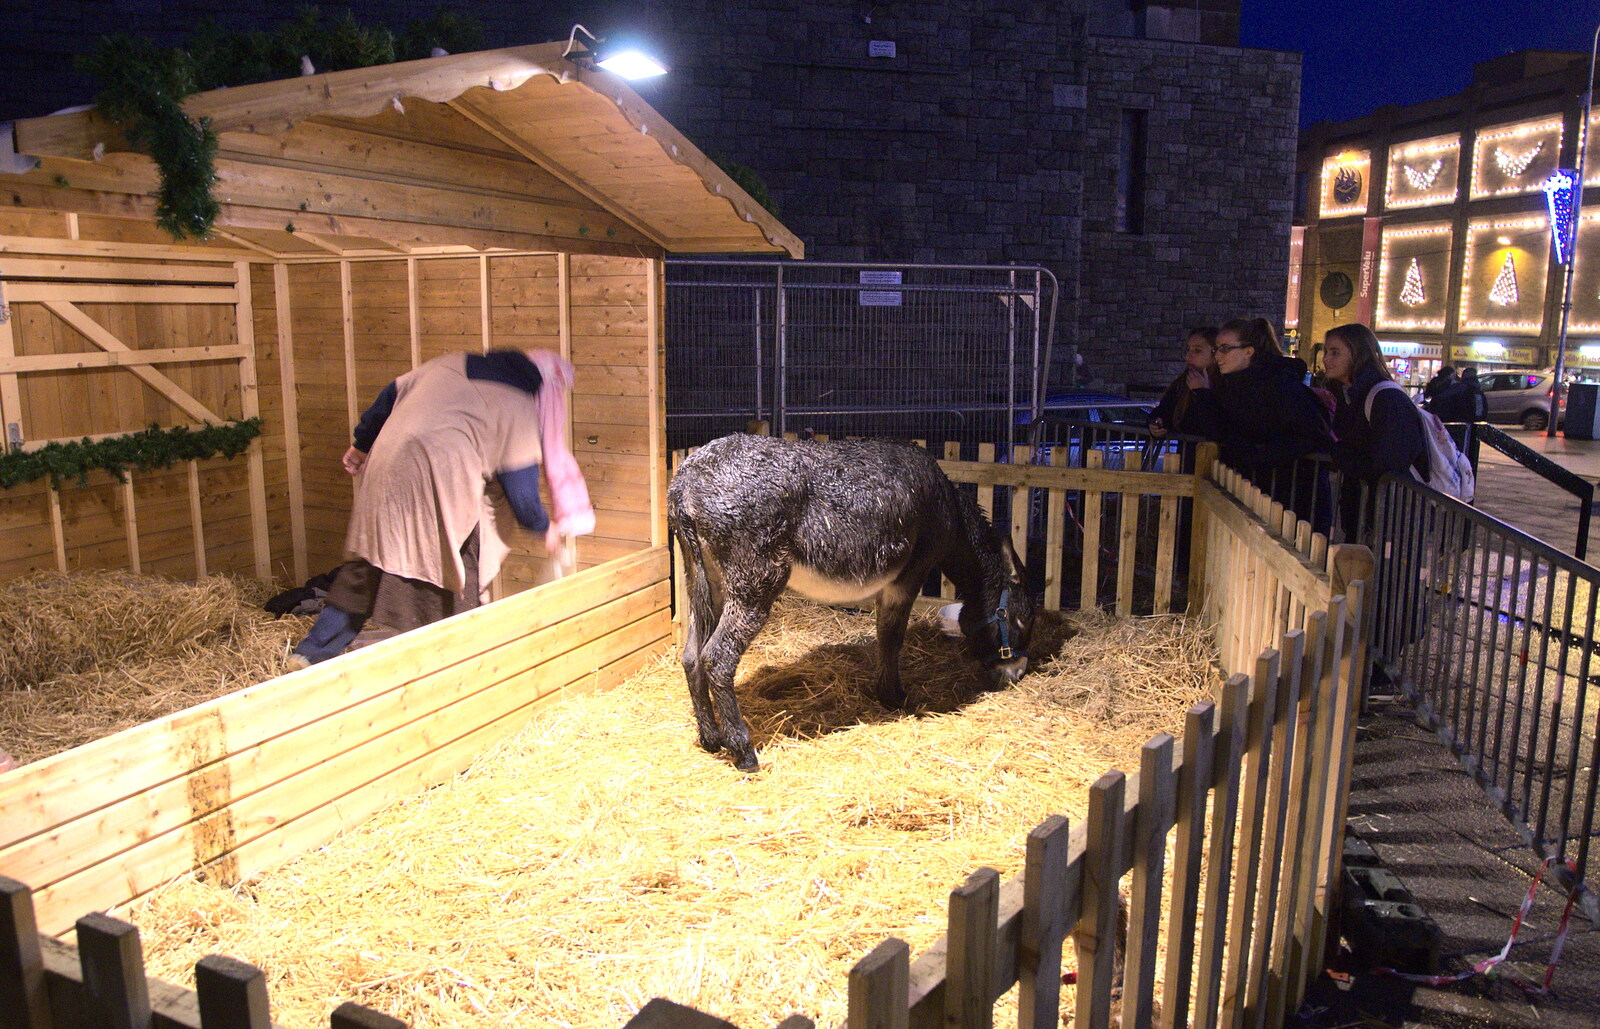 There's a real donkey in the Nativity display from A Night on the Lash, Dublin, Ireland - 14th December 2012